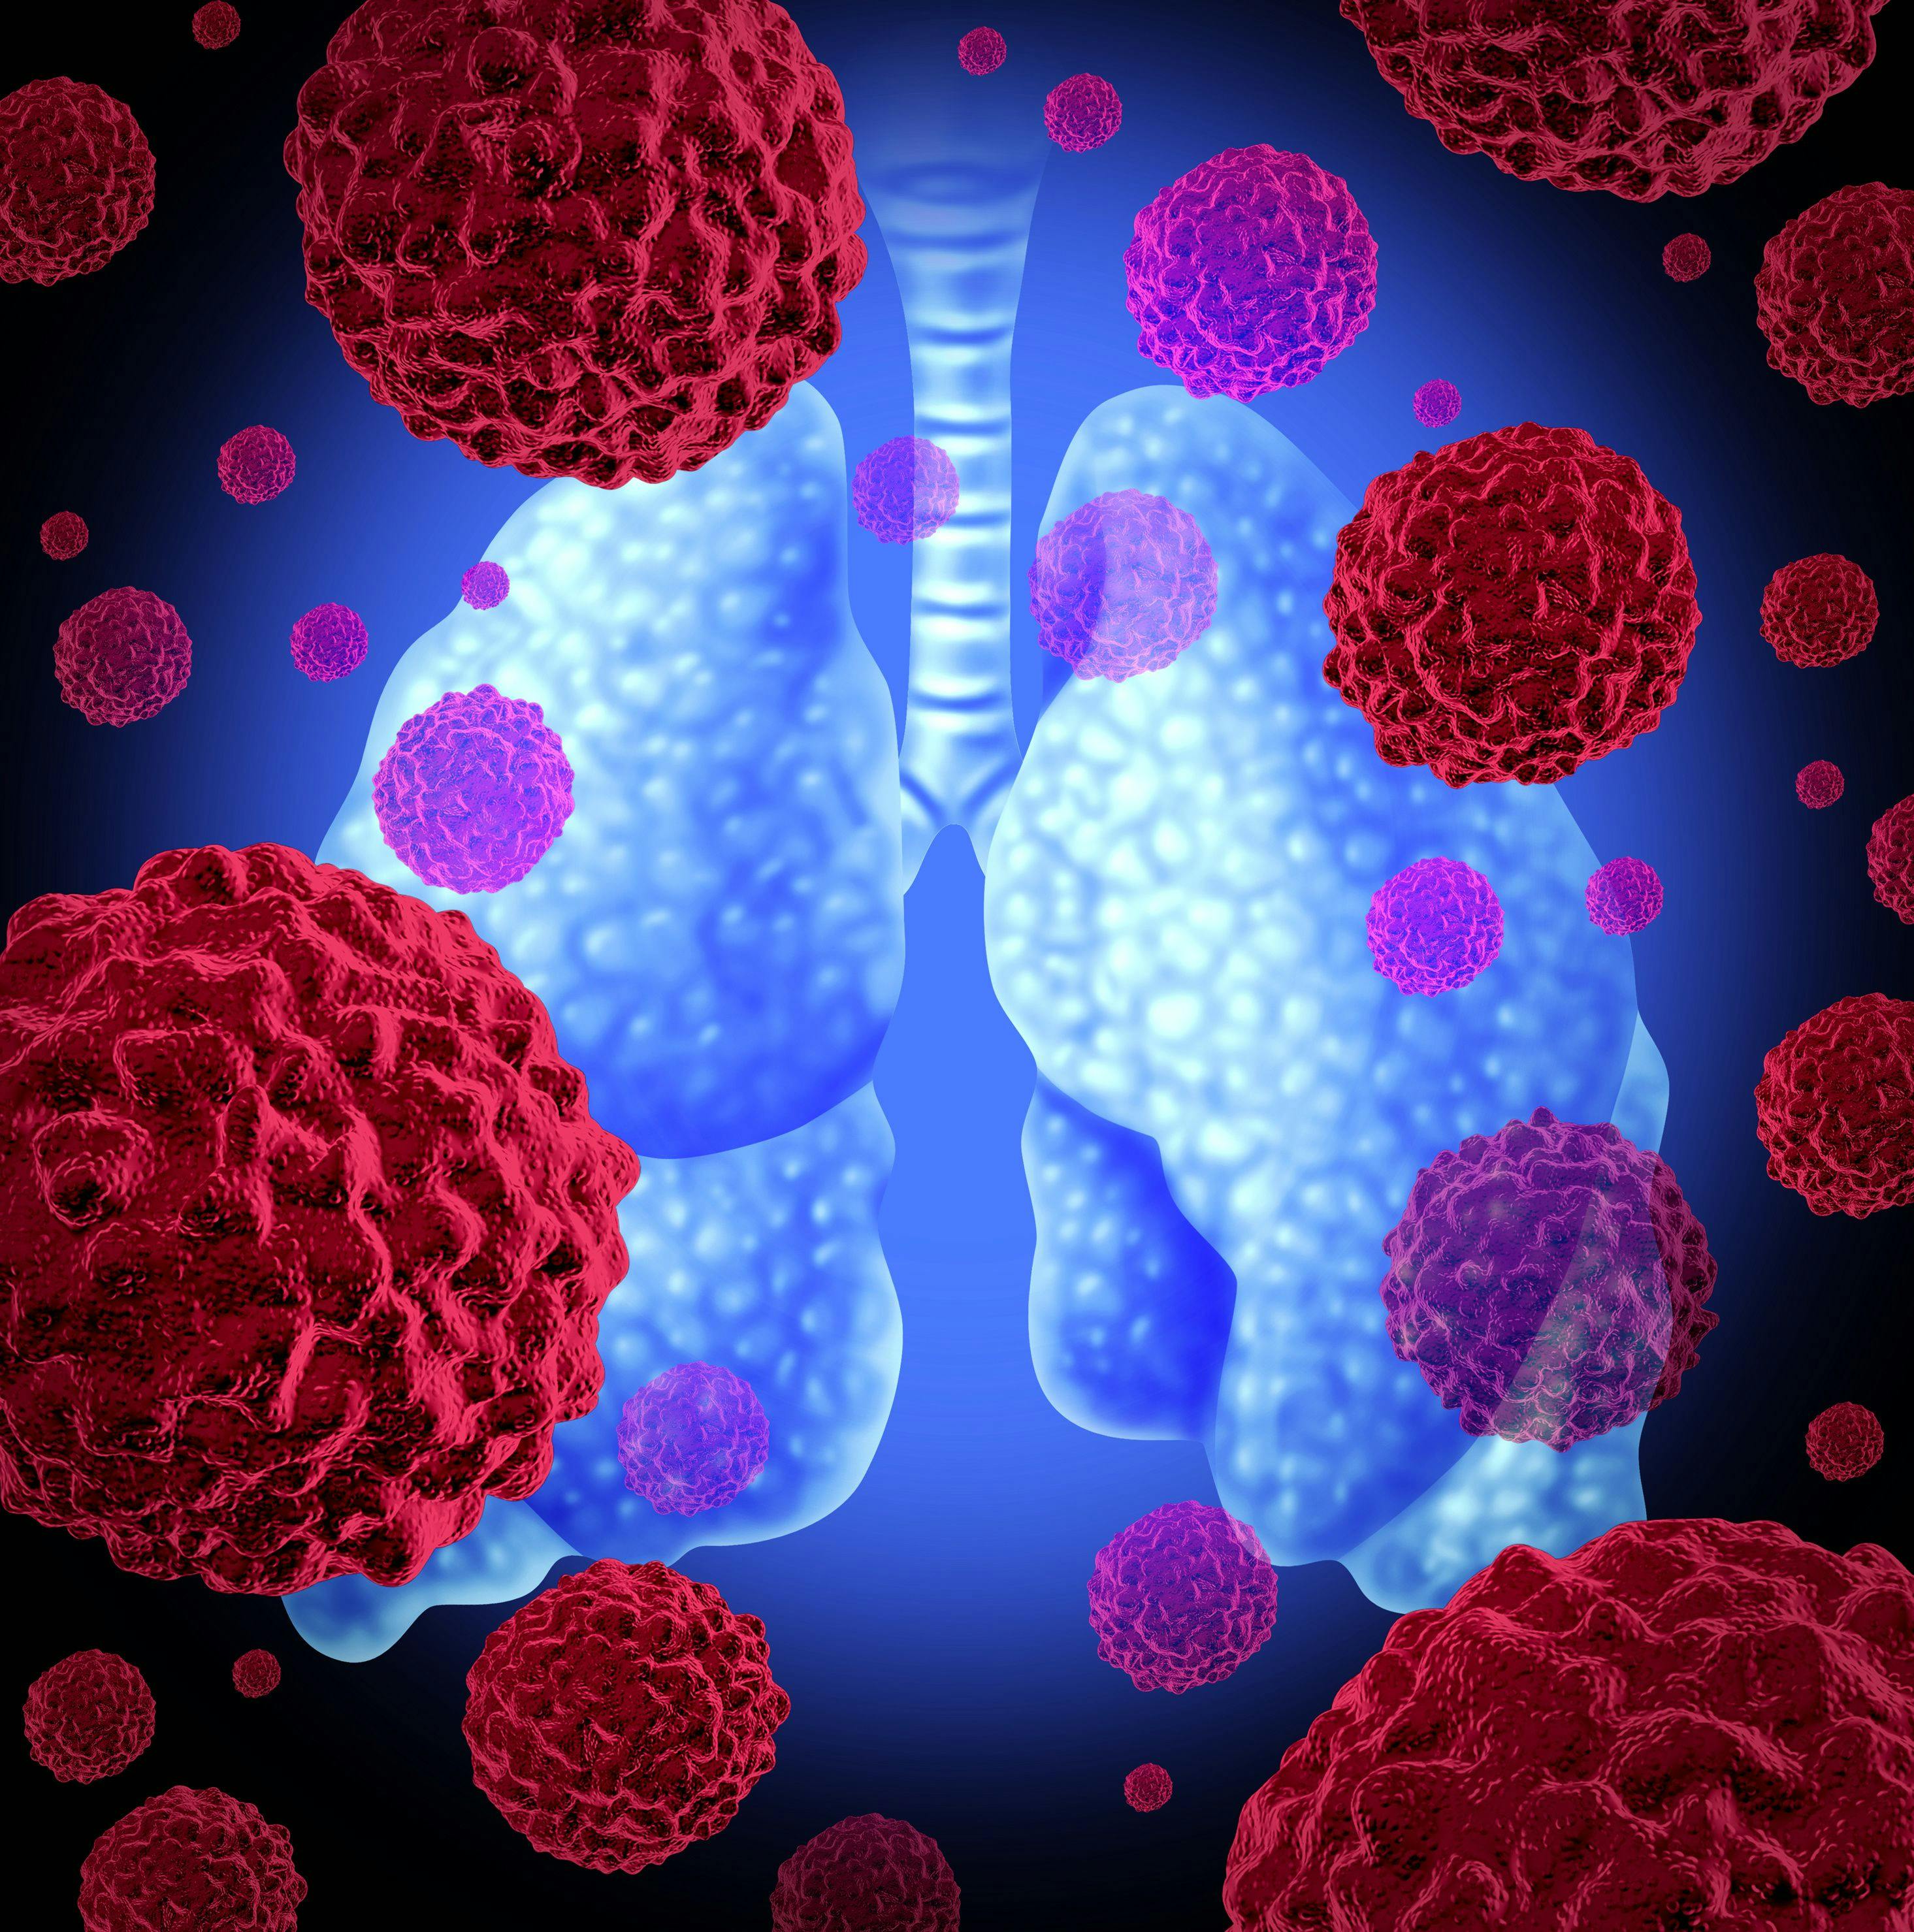 cancer cells targeting the lungs